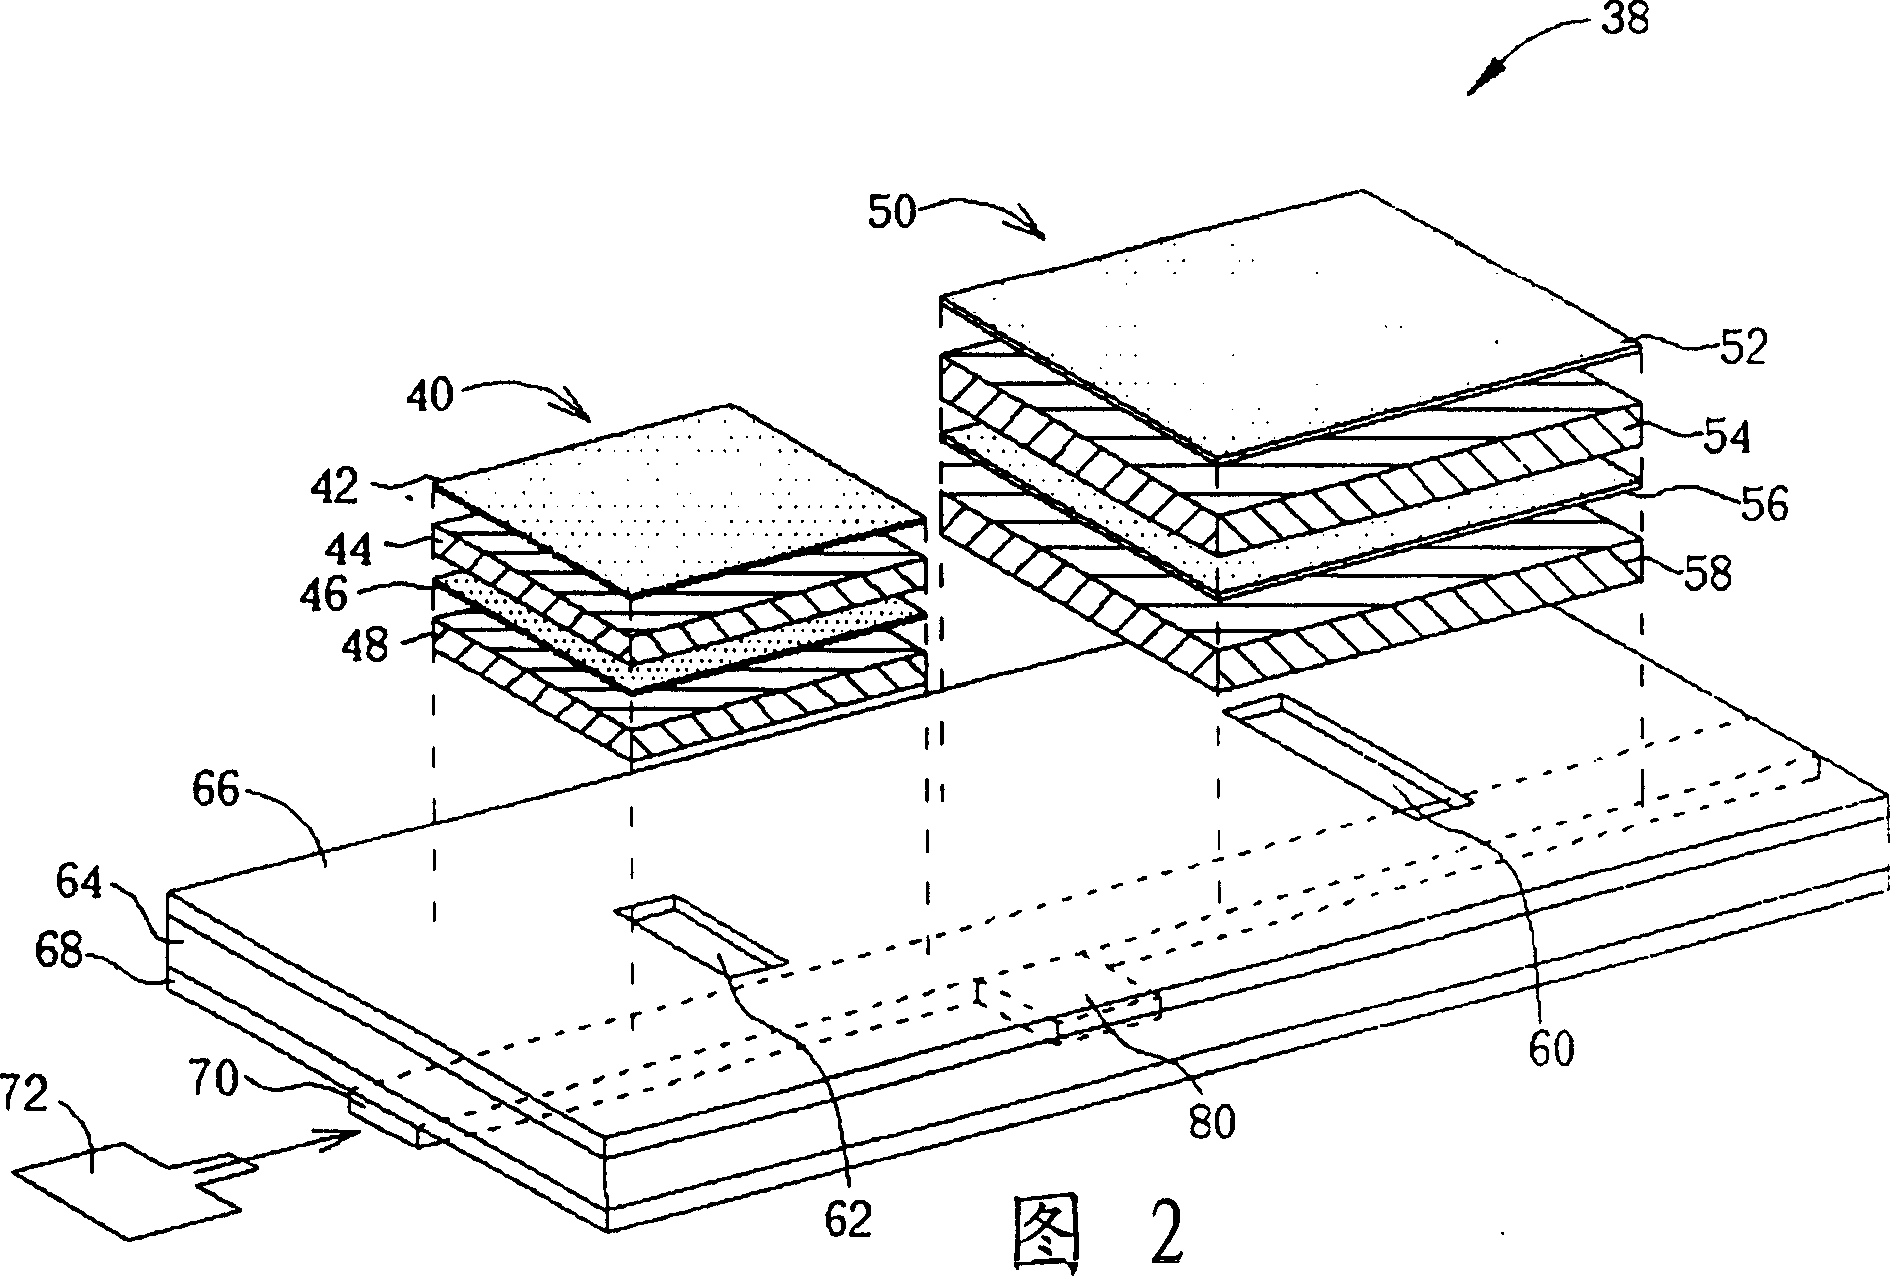 Multi layer flat antenna capable of providing bifrequency service